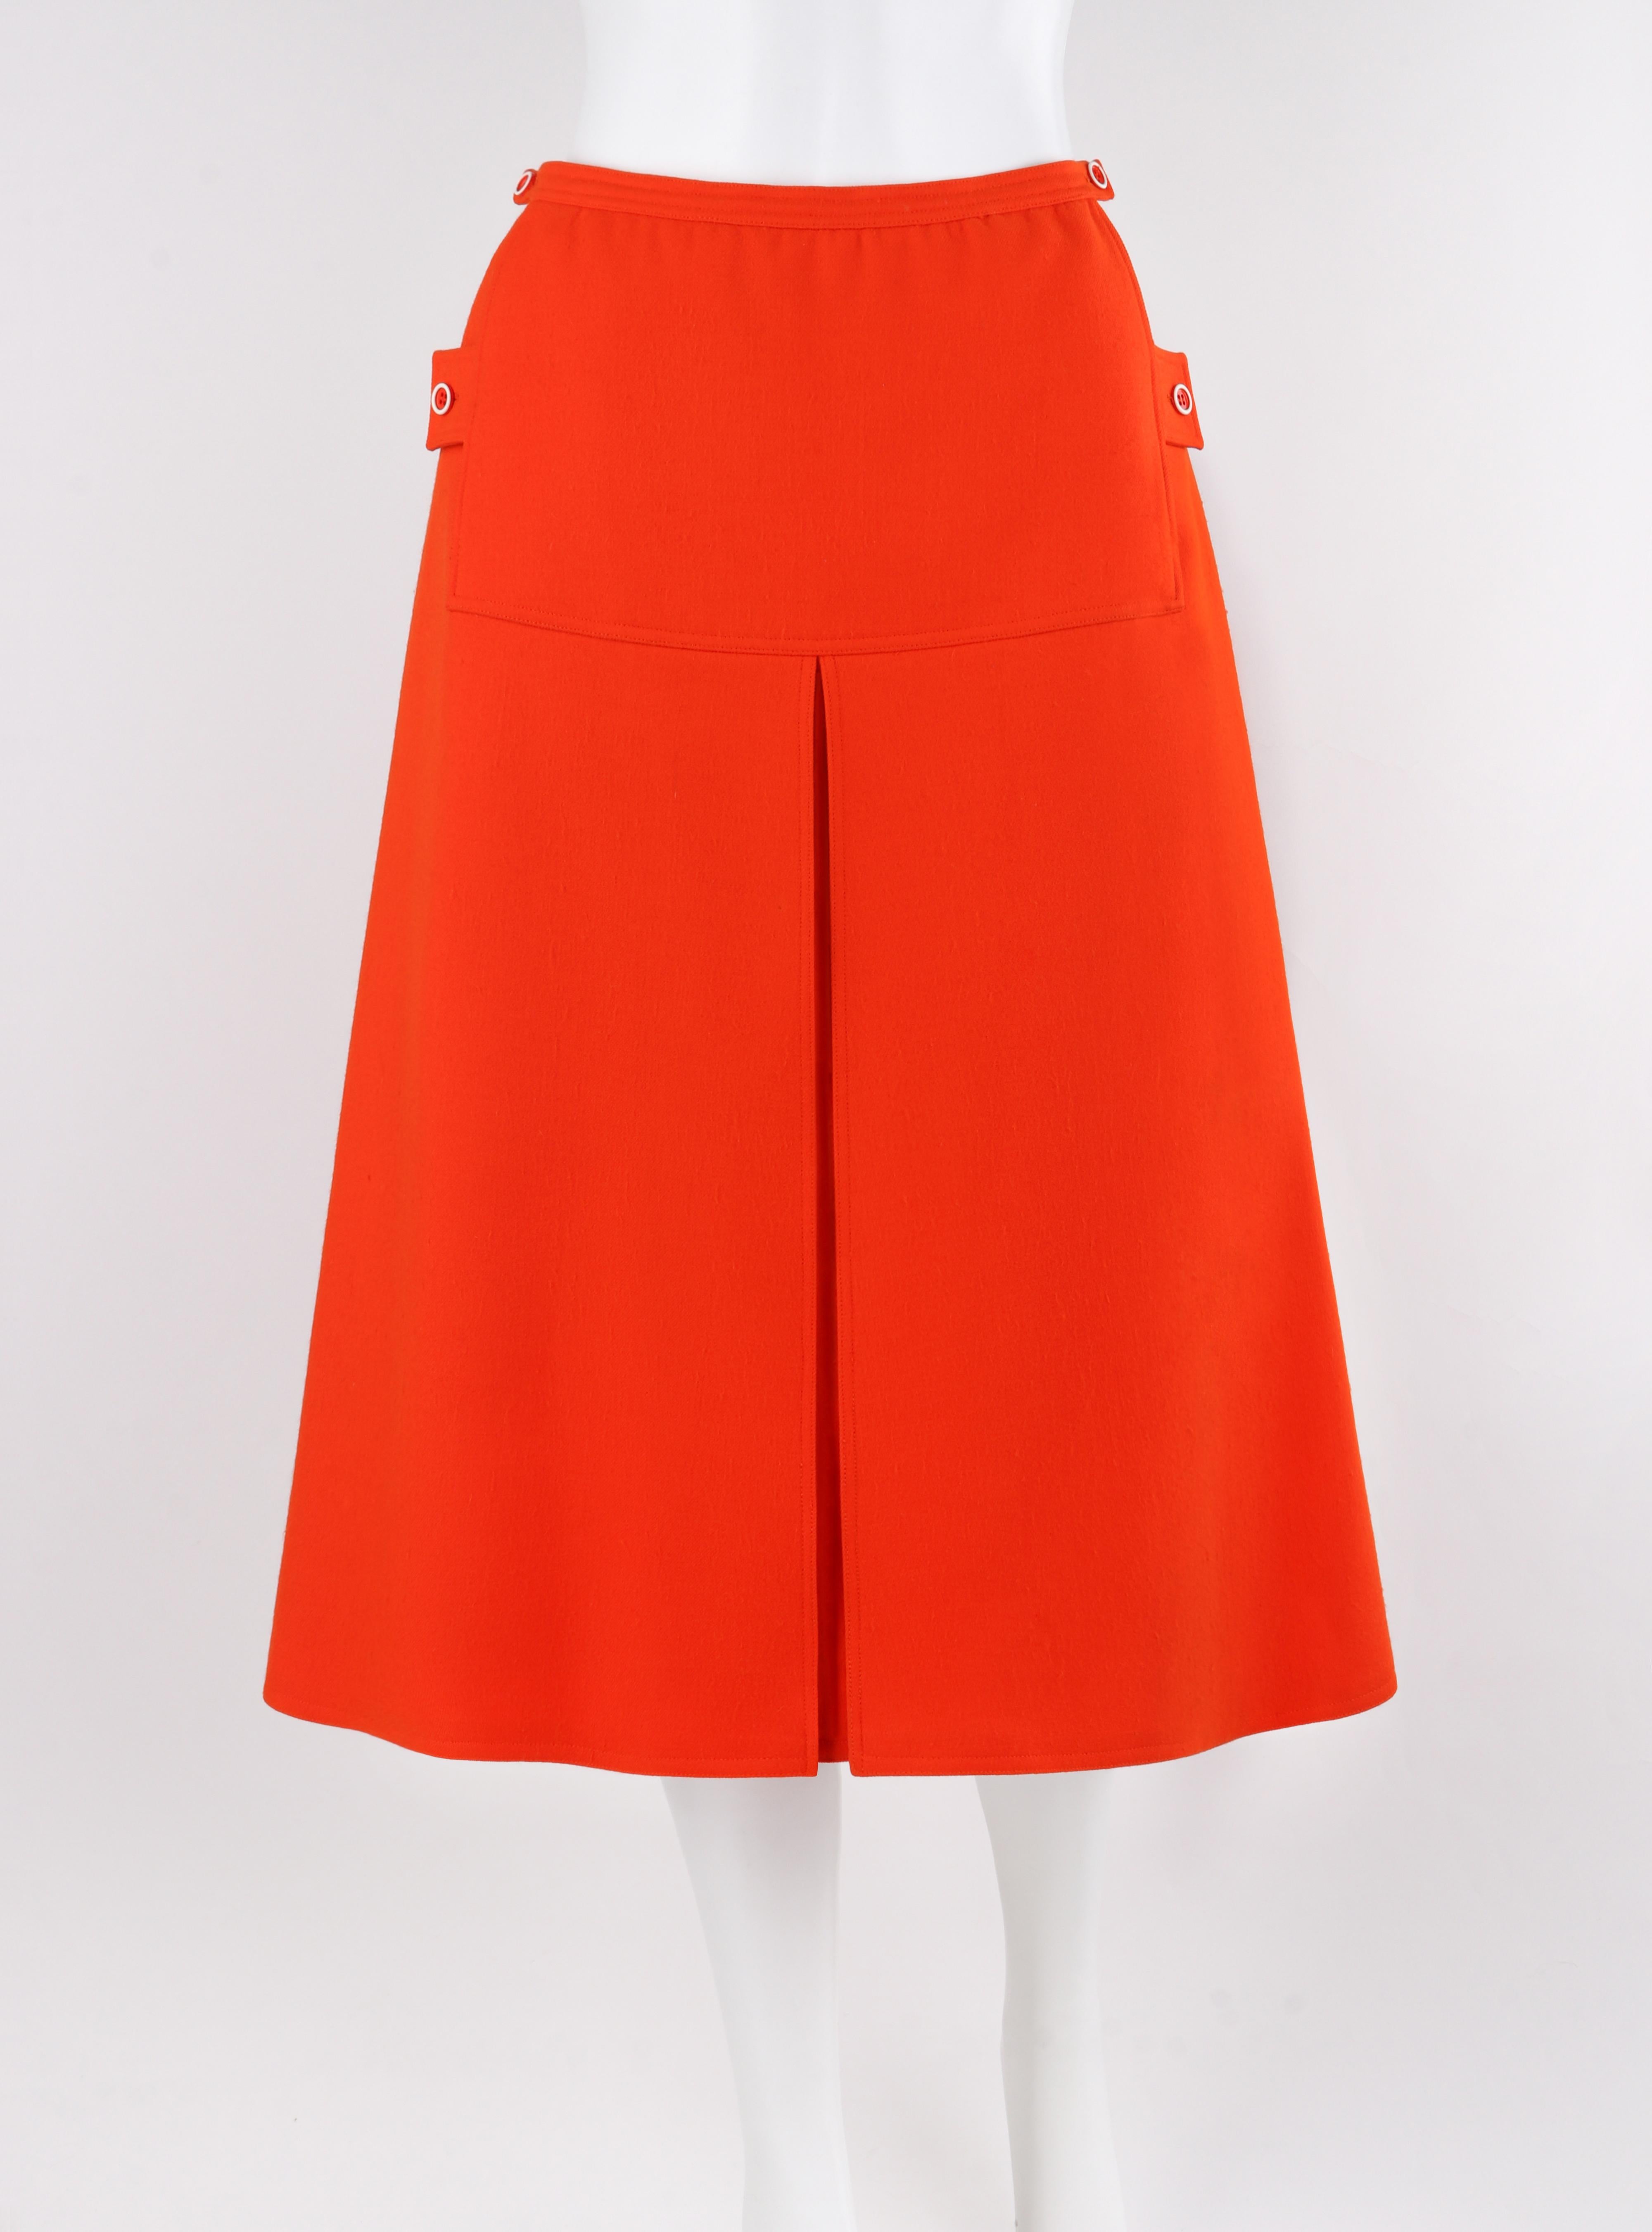 COURREGES c.1960's Vtg Orange Wool A Line Pleated Knee Length Button Skirt

Brand / Manufacturer: Courreges
Circa: 1960's
Designer: Andre Courreges
Style: A Line Skirt
Color(s): Orange, White (buttons)
Lined: Yes
Marked Fabric: 